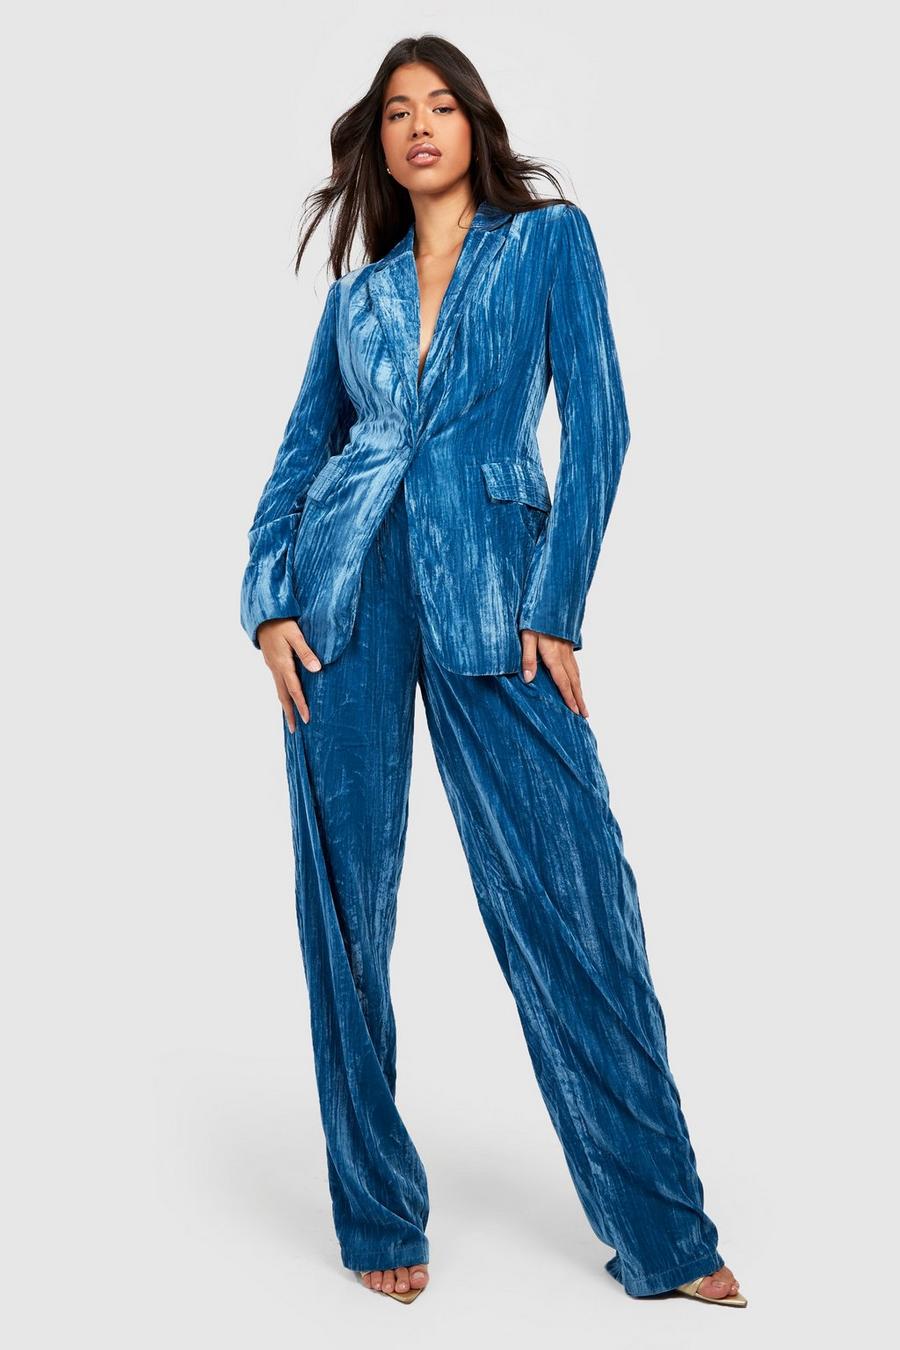 Pacific blue Tall Crinkle Velvet Tapered Pants image number 1